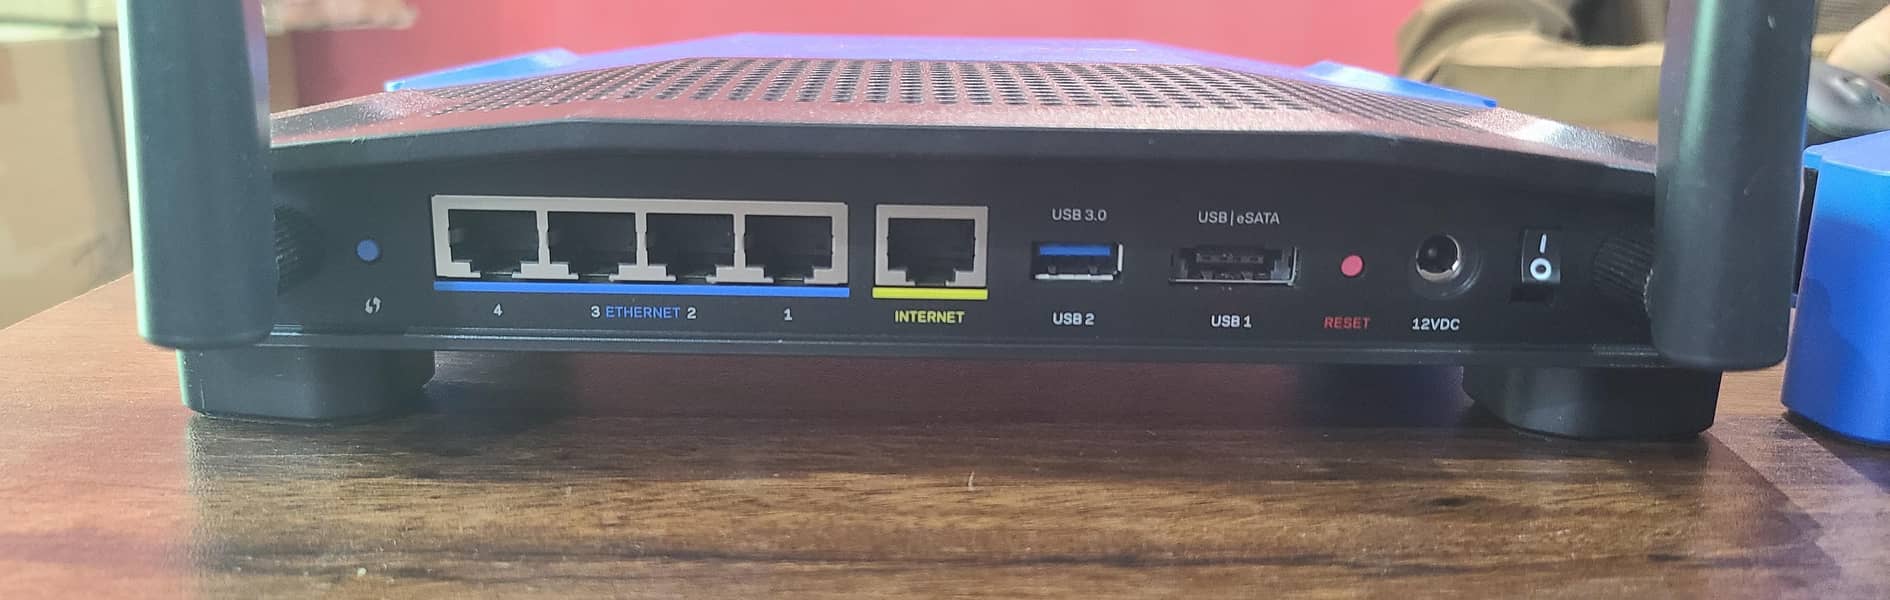 Linksys WRT 1200AC Dual-Band VPN Wi-Fi Router (Branded Used) Others, Q 13